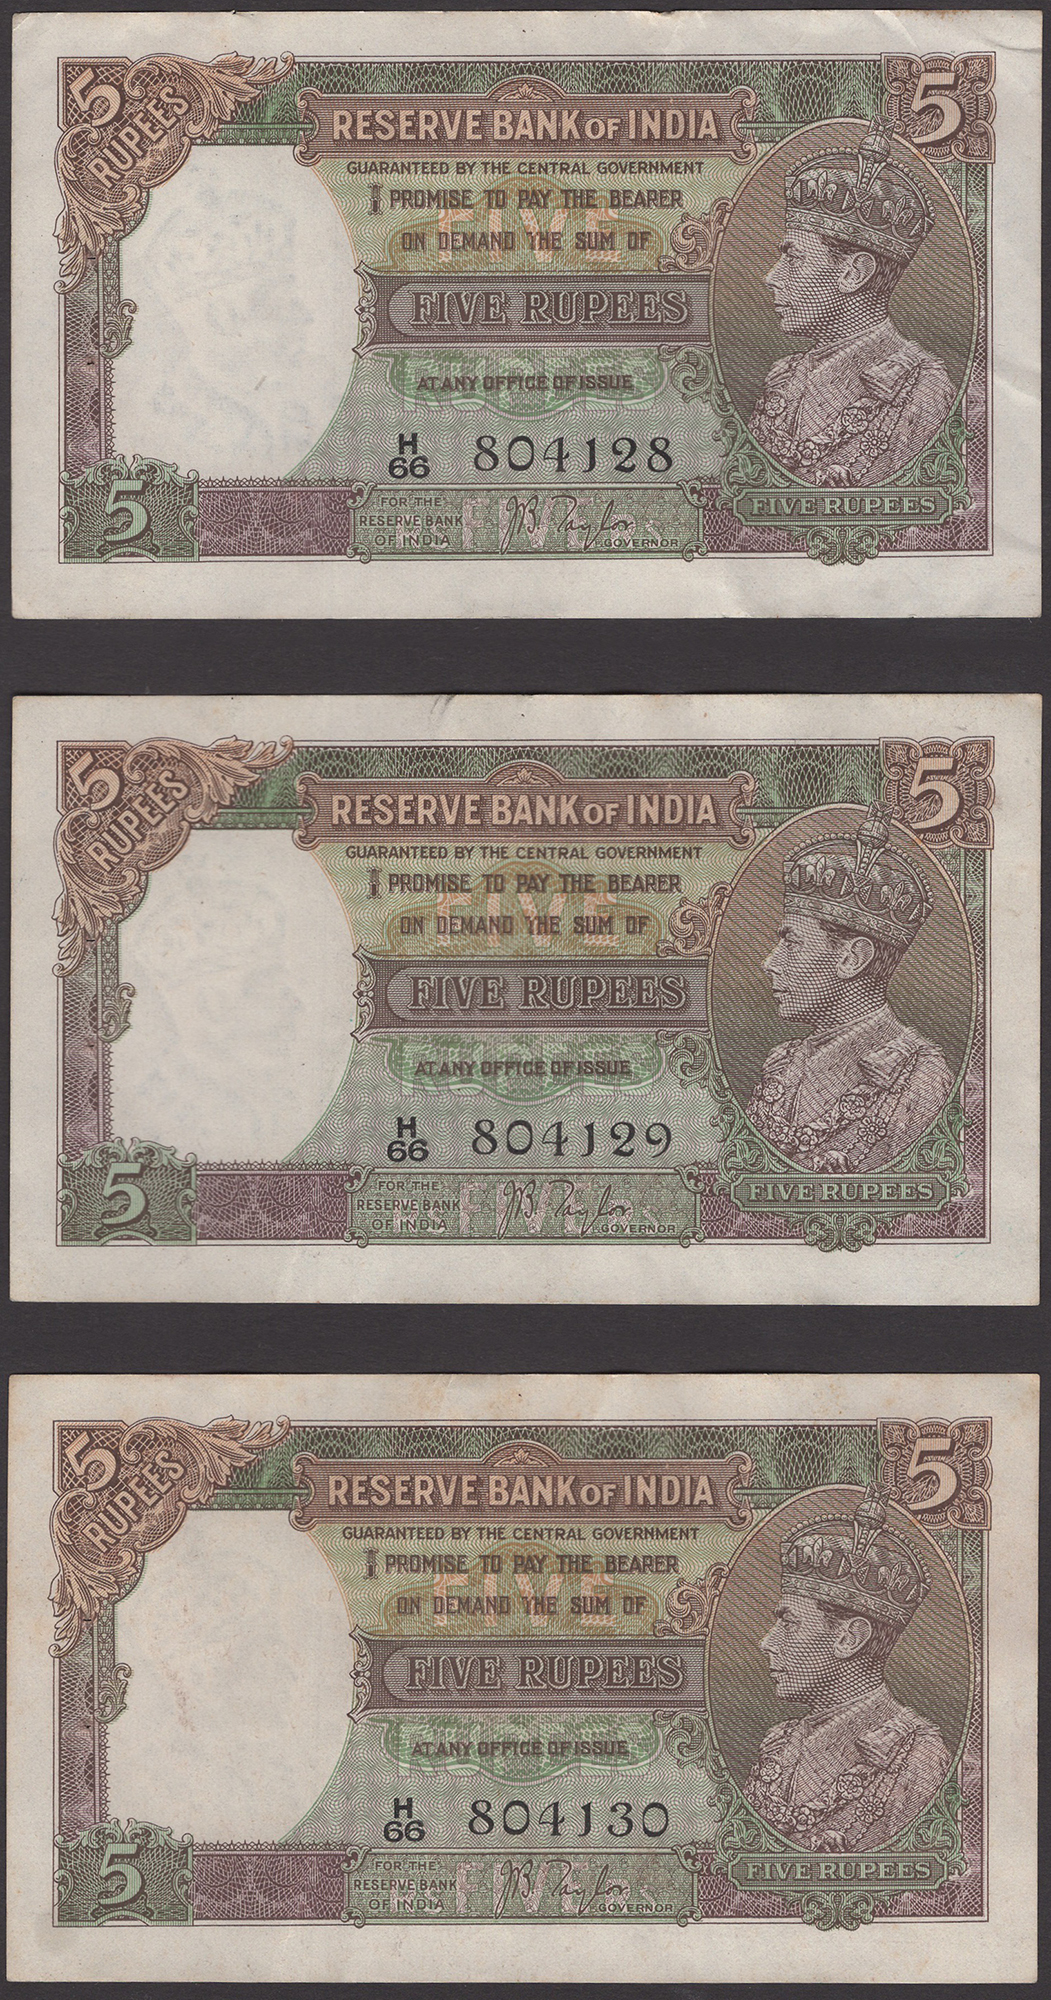 Reserve Bank of India, 5 Rupees (6), ND (1937), consecutive serial numbers H/66 804124-26... - Image 3 of 4